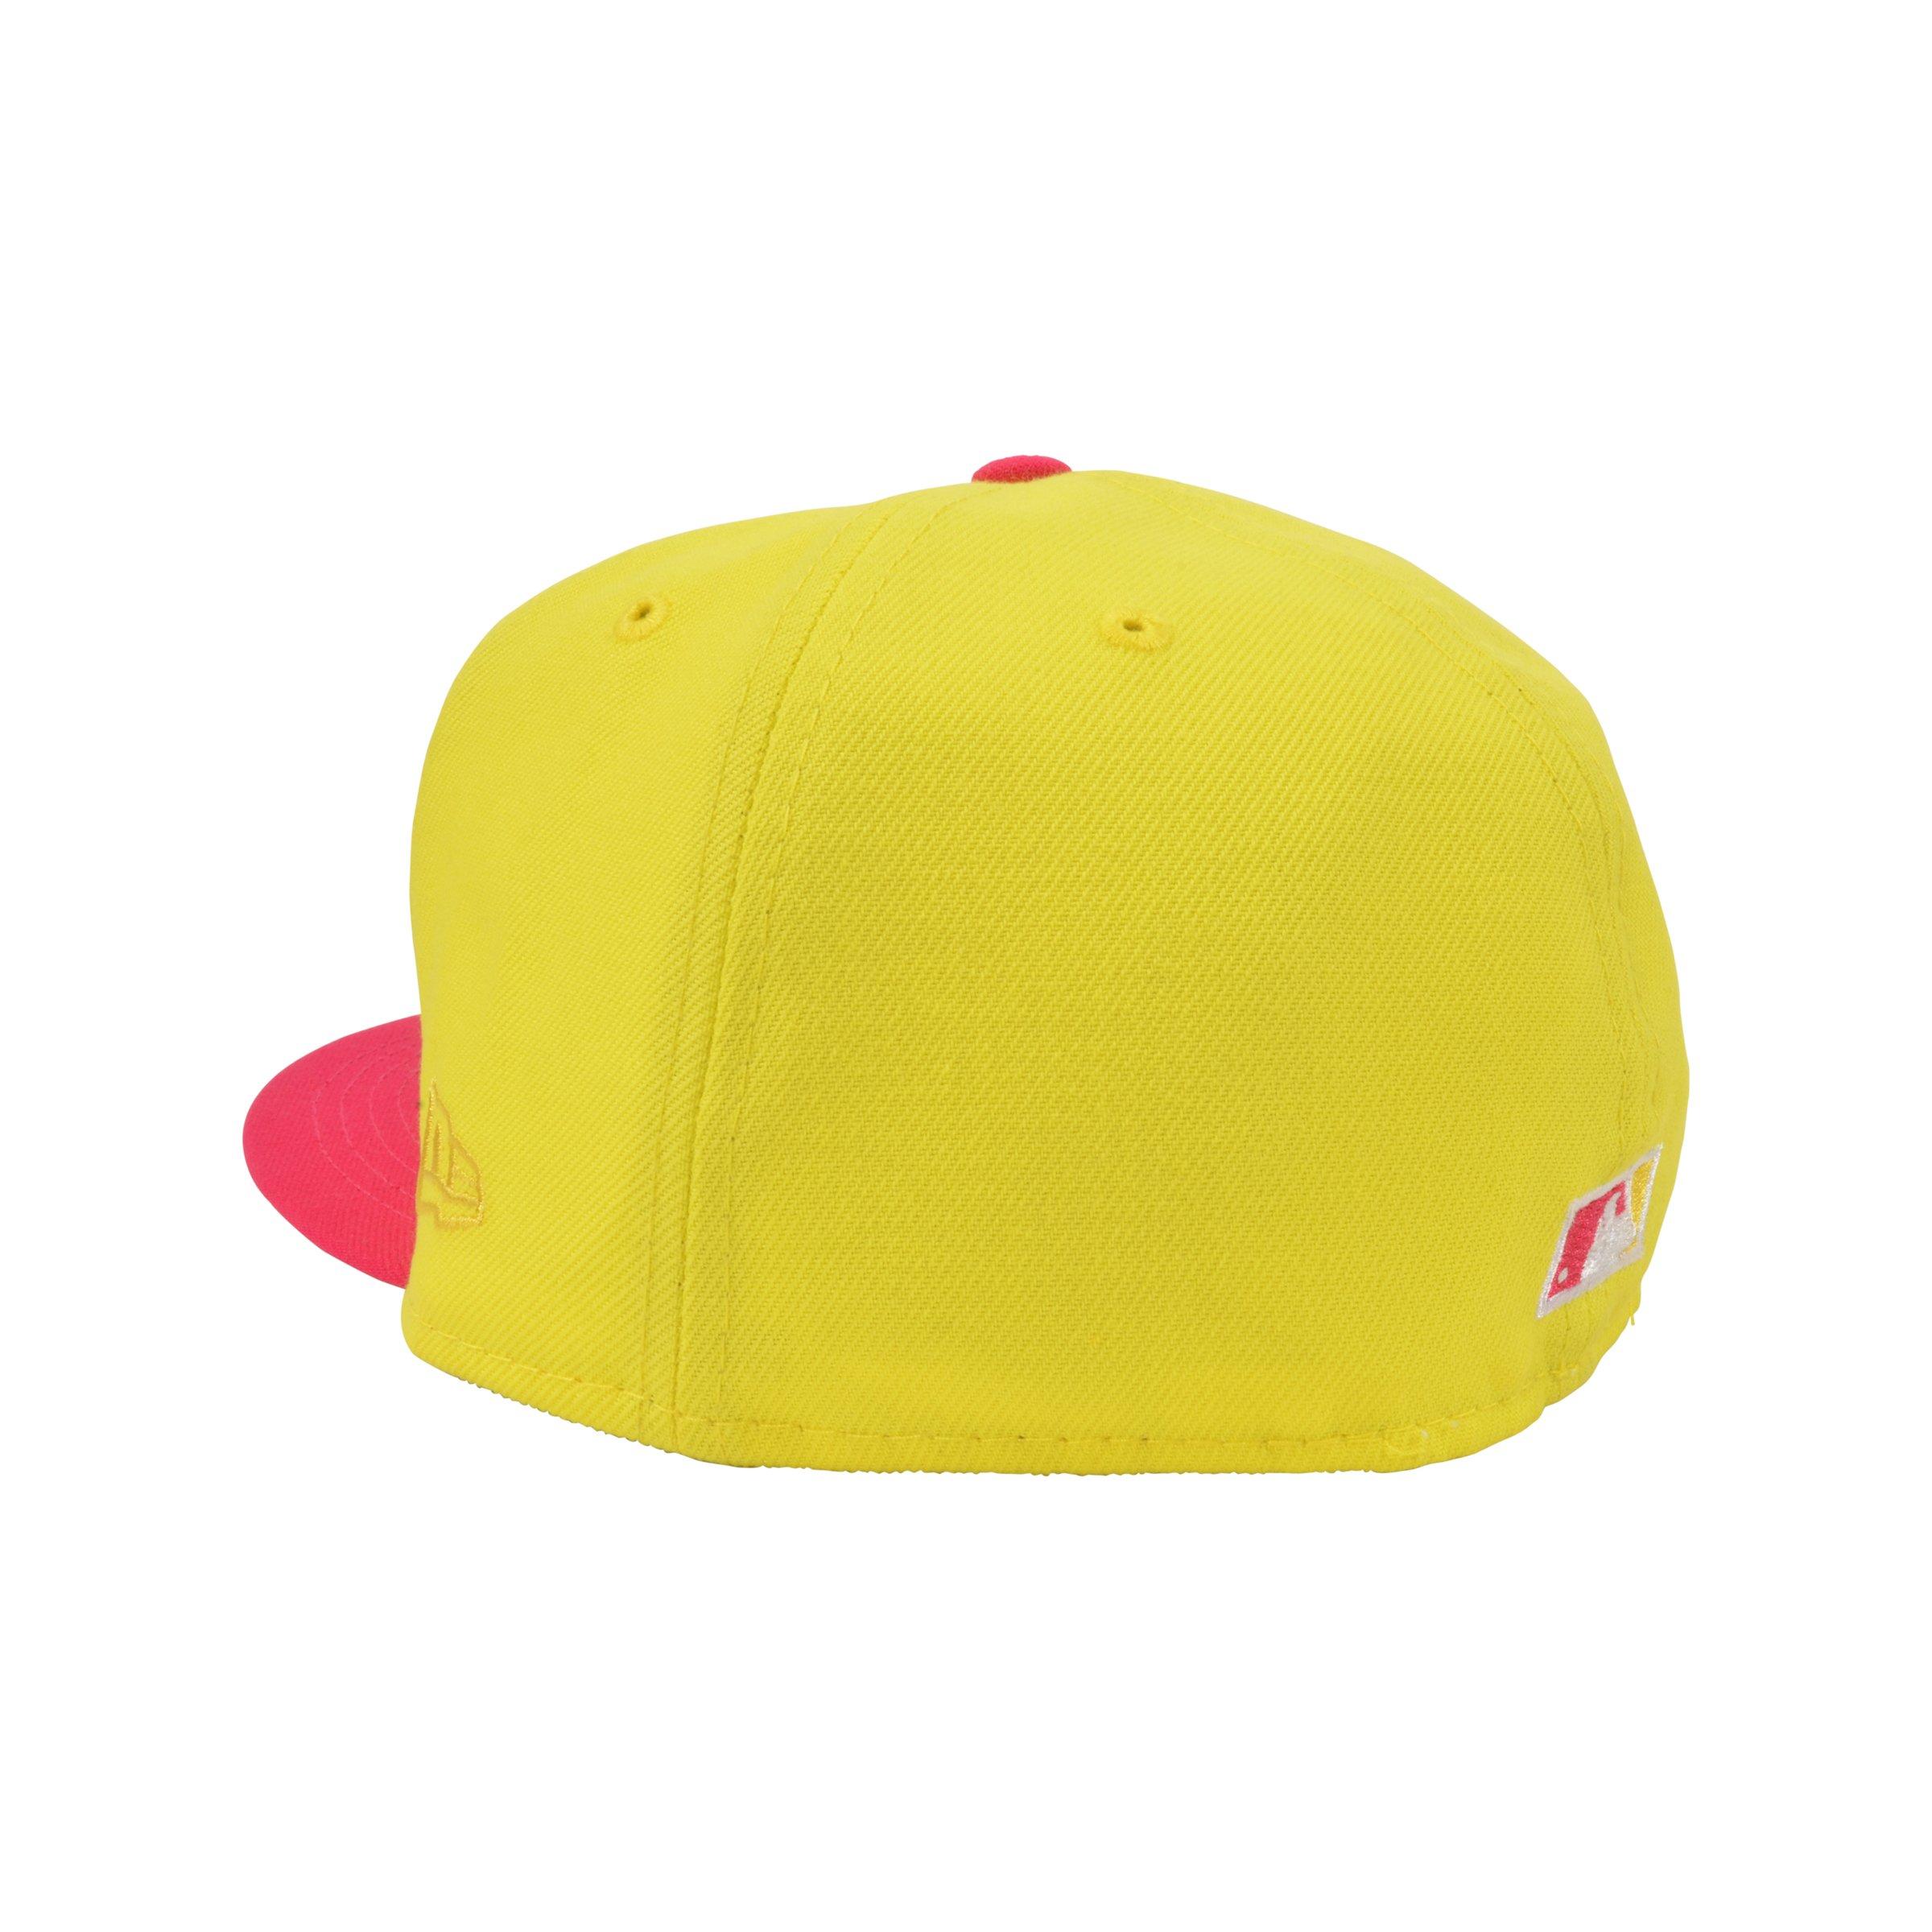 Official New Era Boston Red Sox MLB Back to School Yellow 59FIFTY